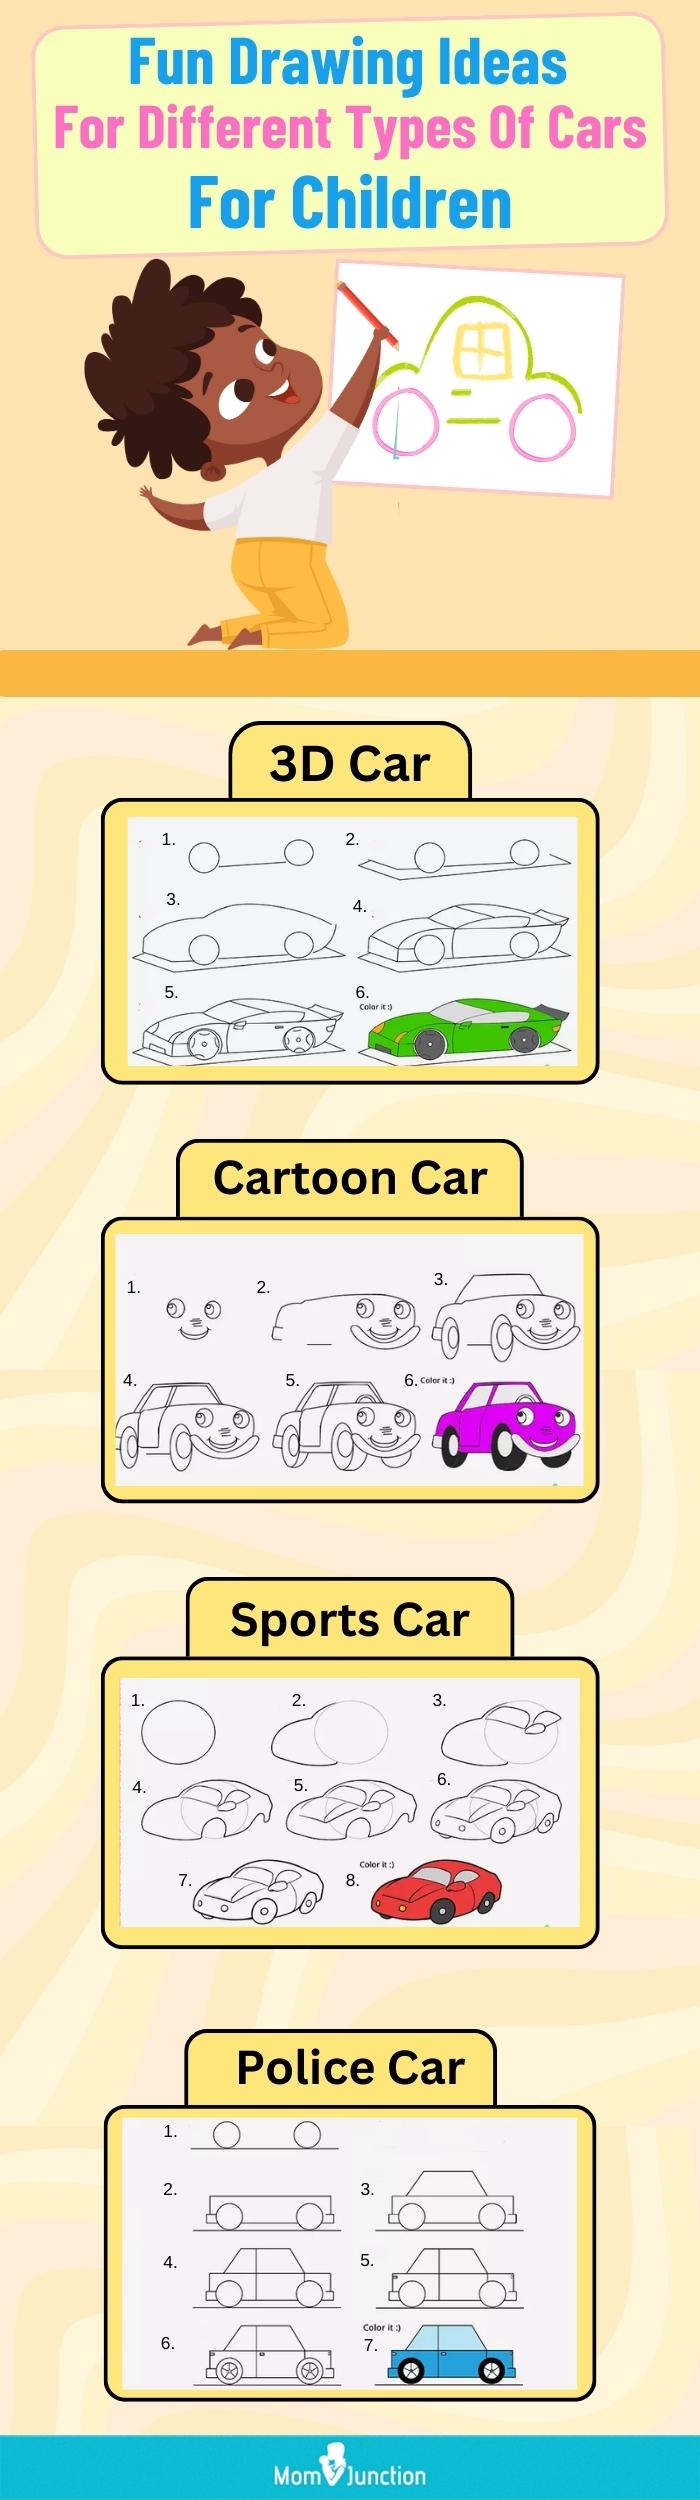 fun drawing ideas for different types of cars for children (infographic)